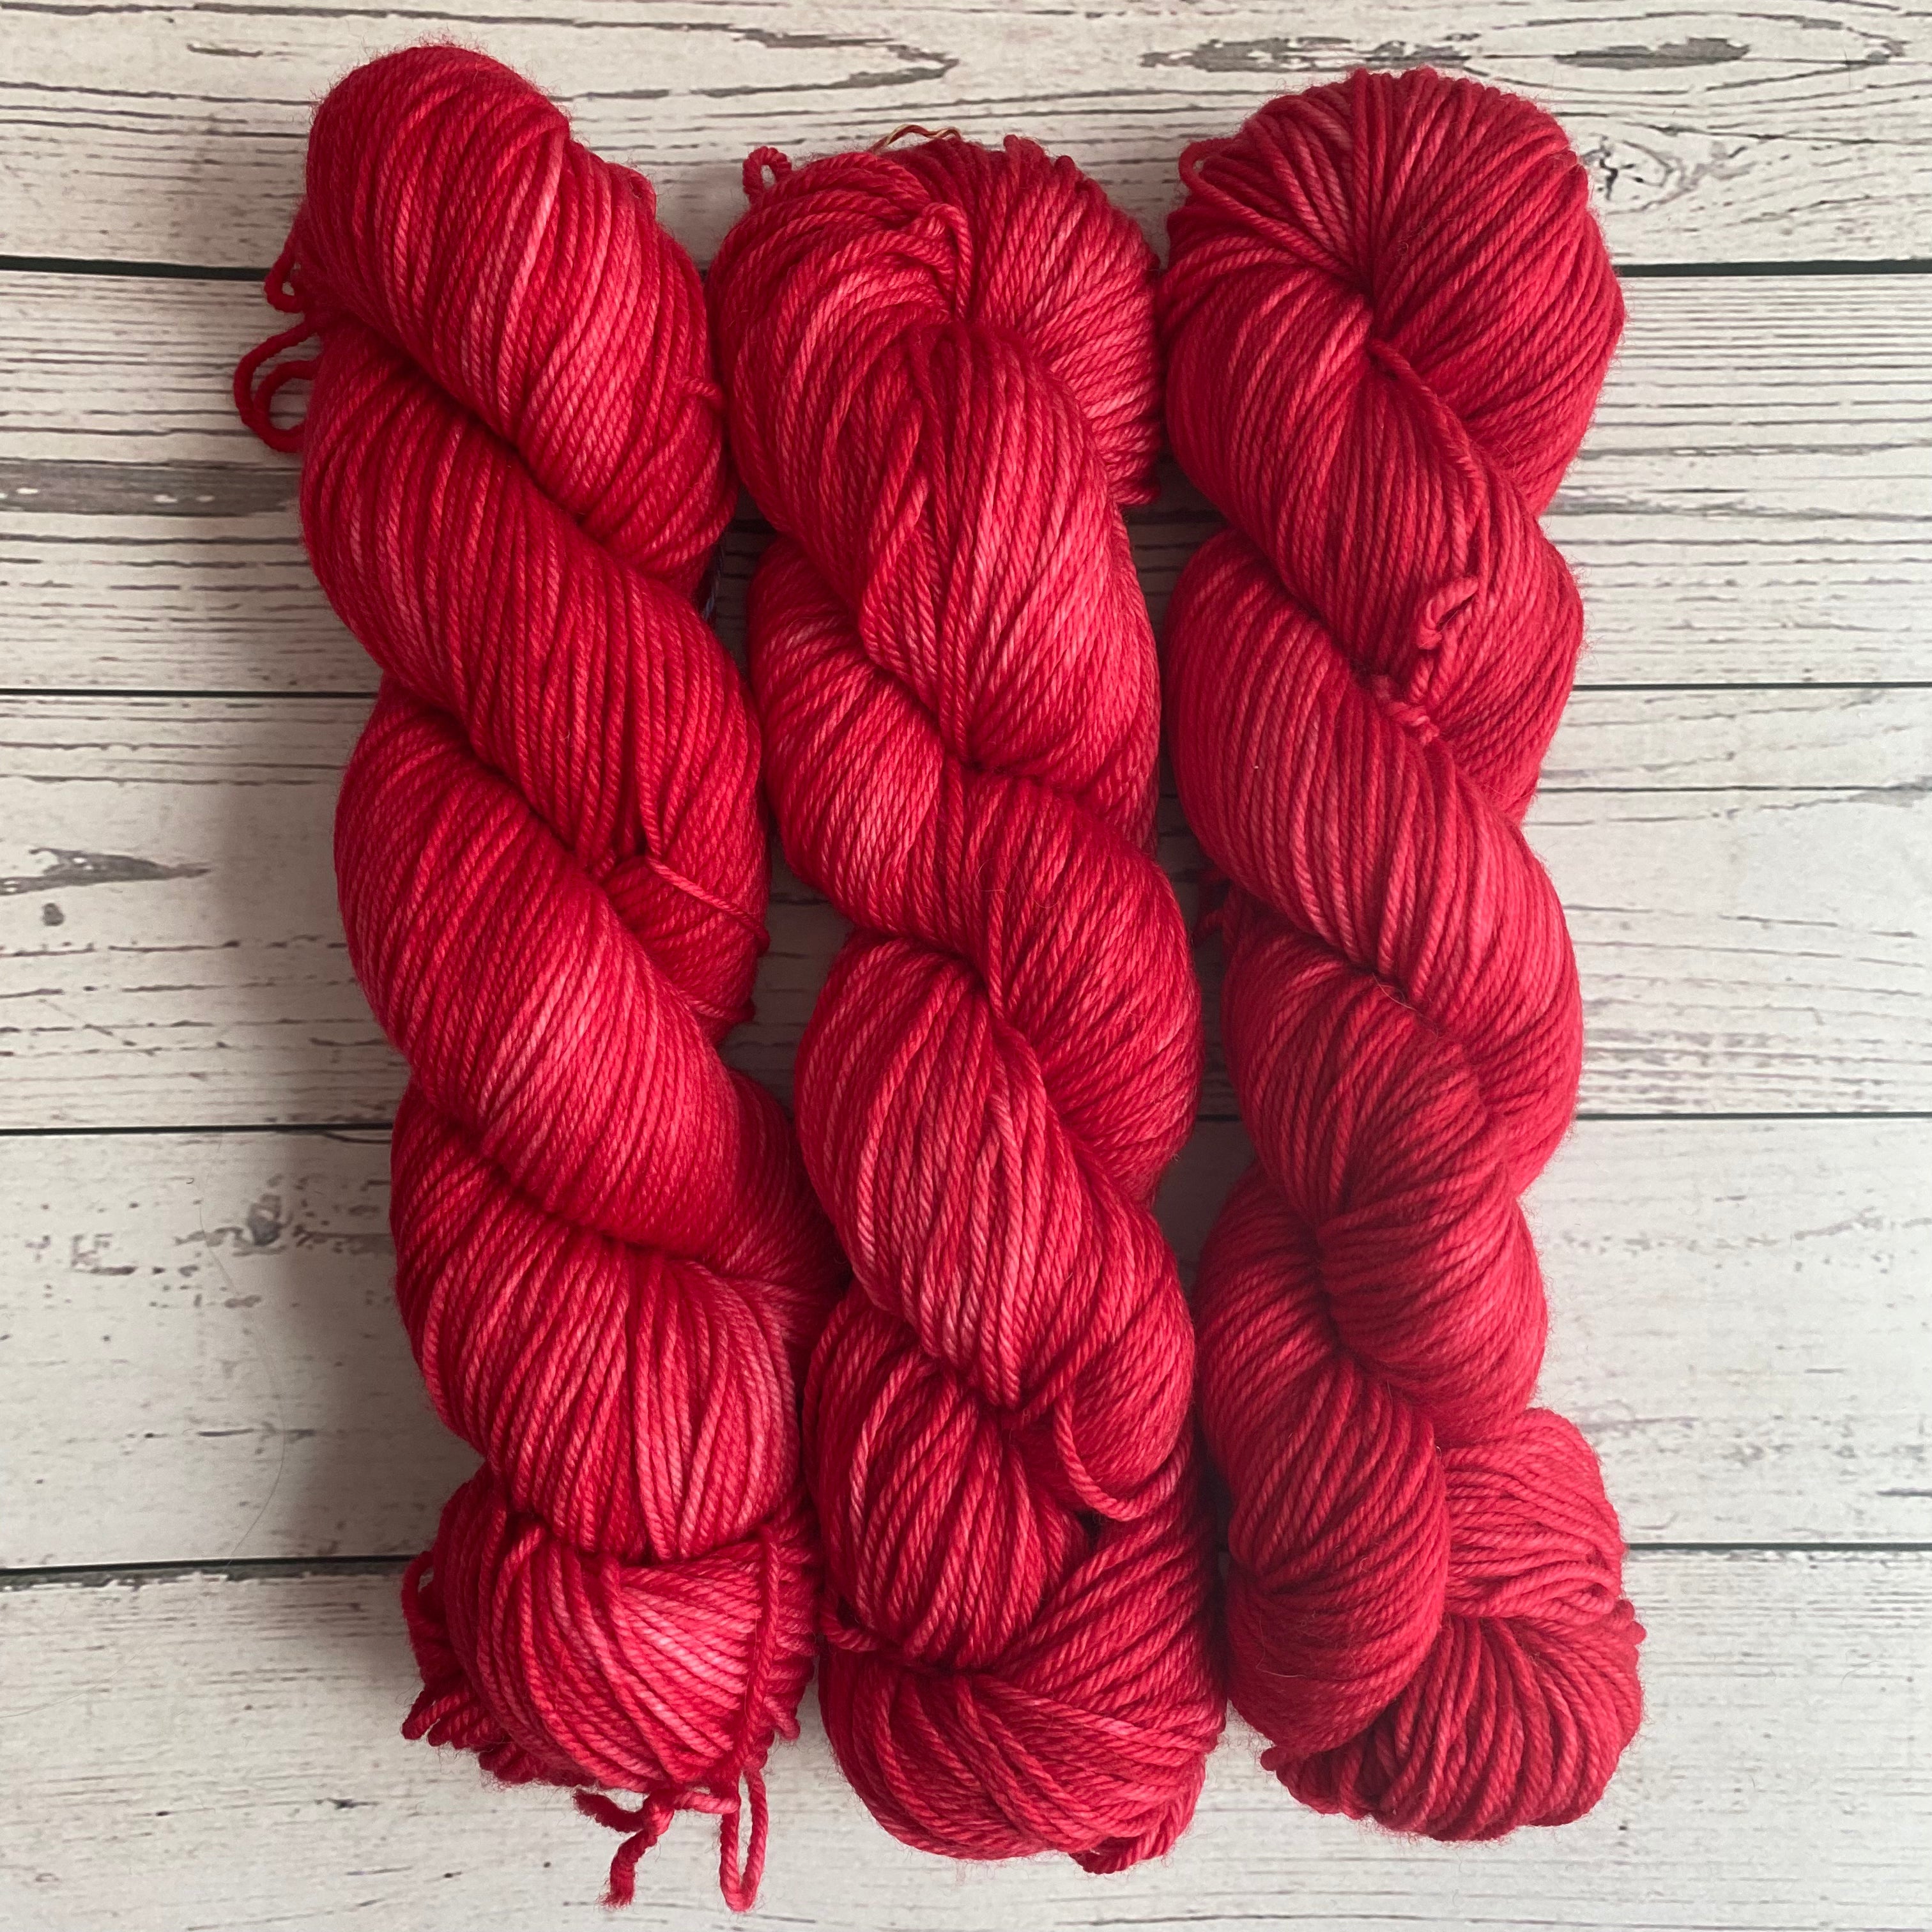 Chili Pepper Plump Worsted